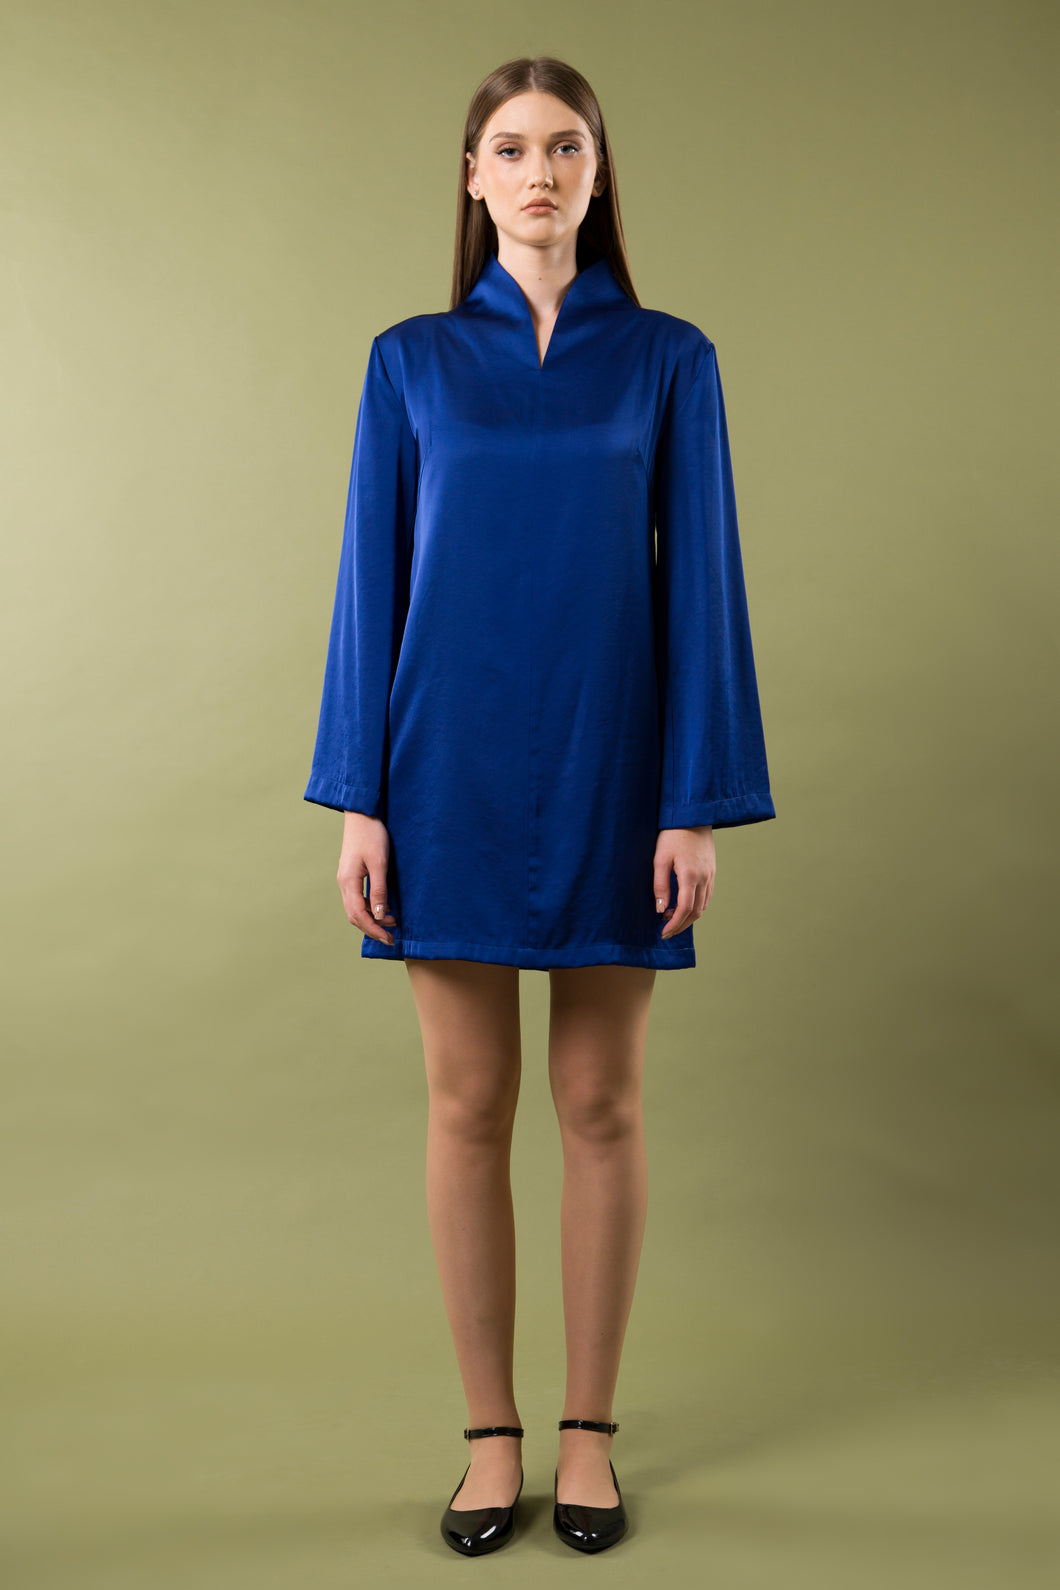 Sapphire blue cocktail dress with long sleeves